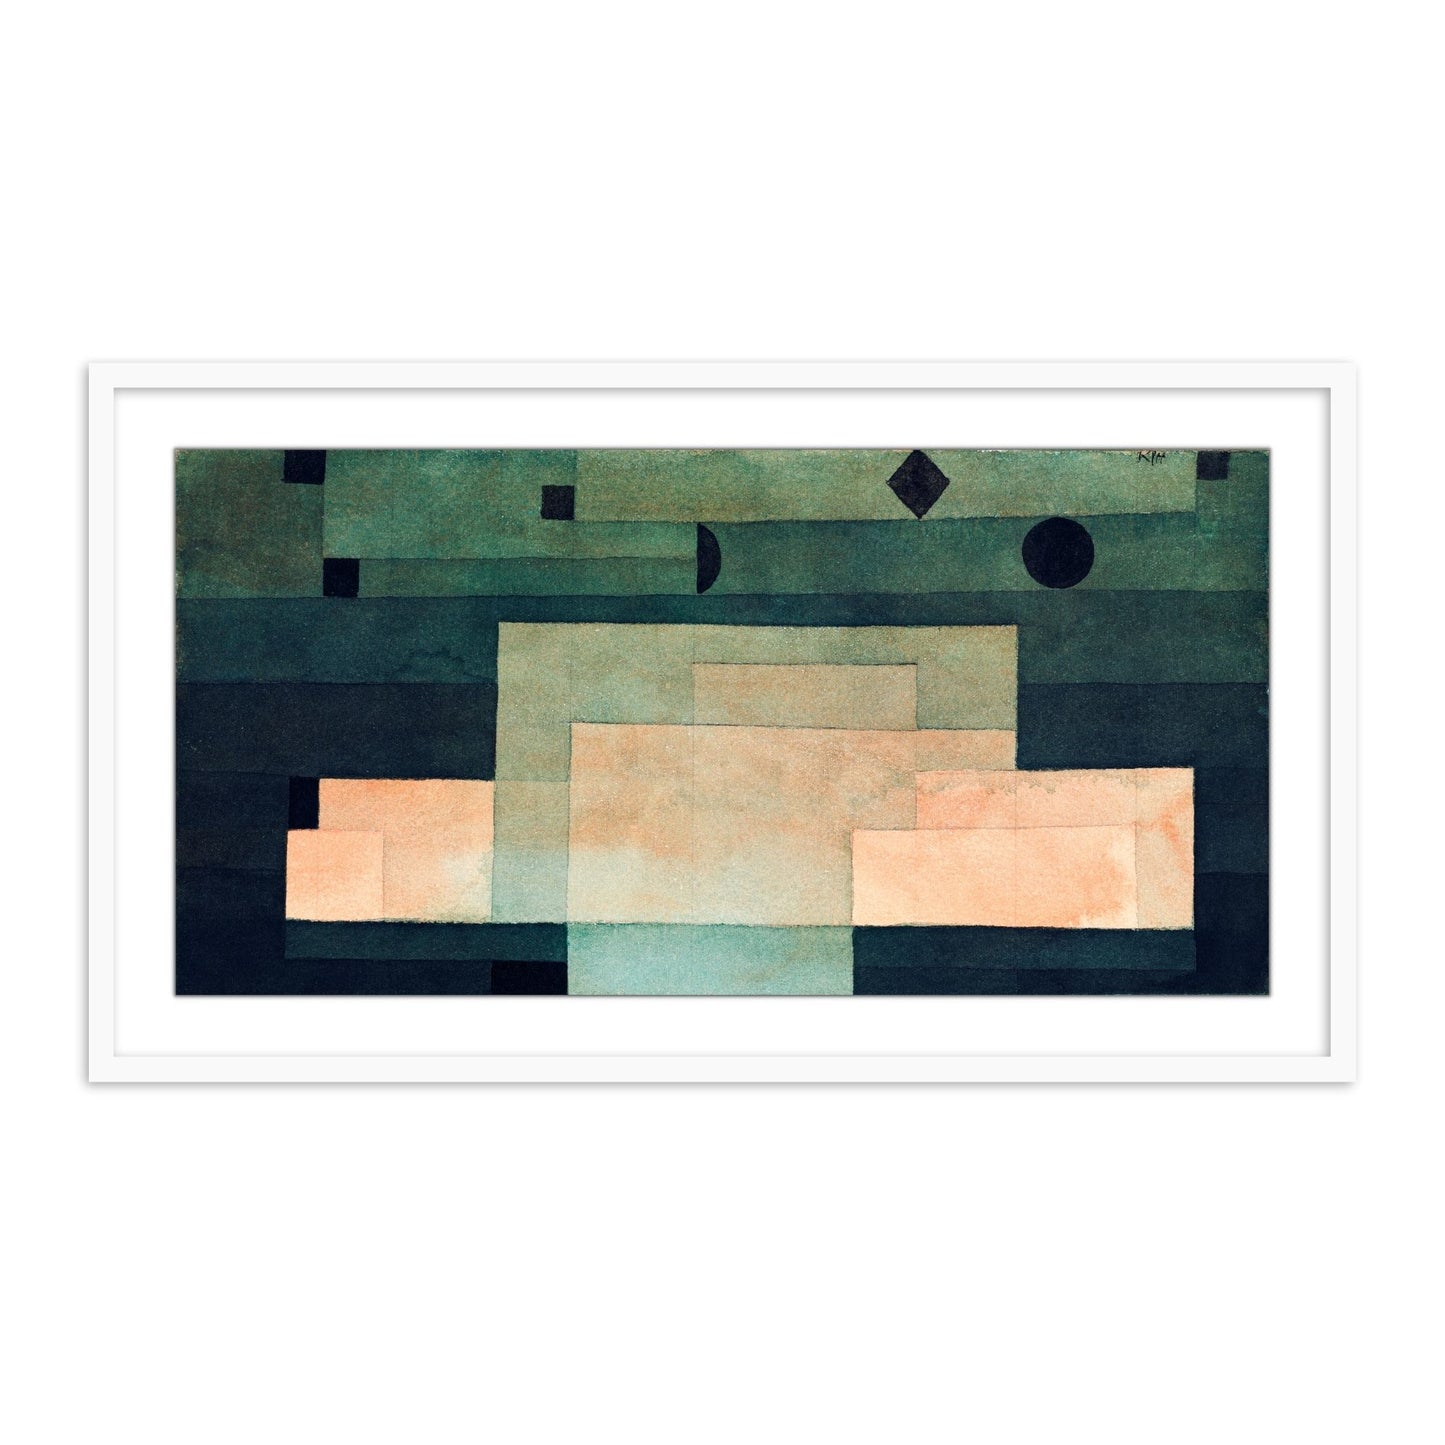 The Firmament Above the Temple by Paul Klee